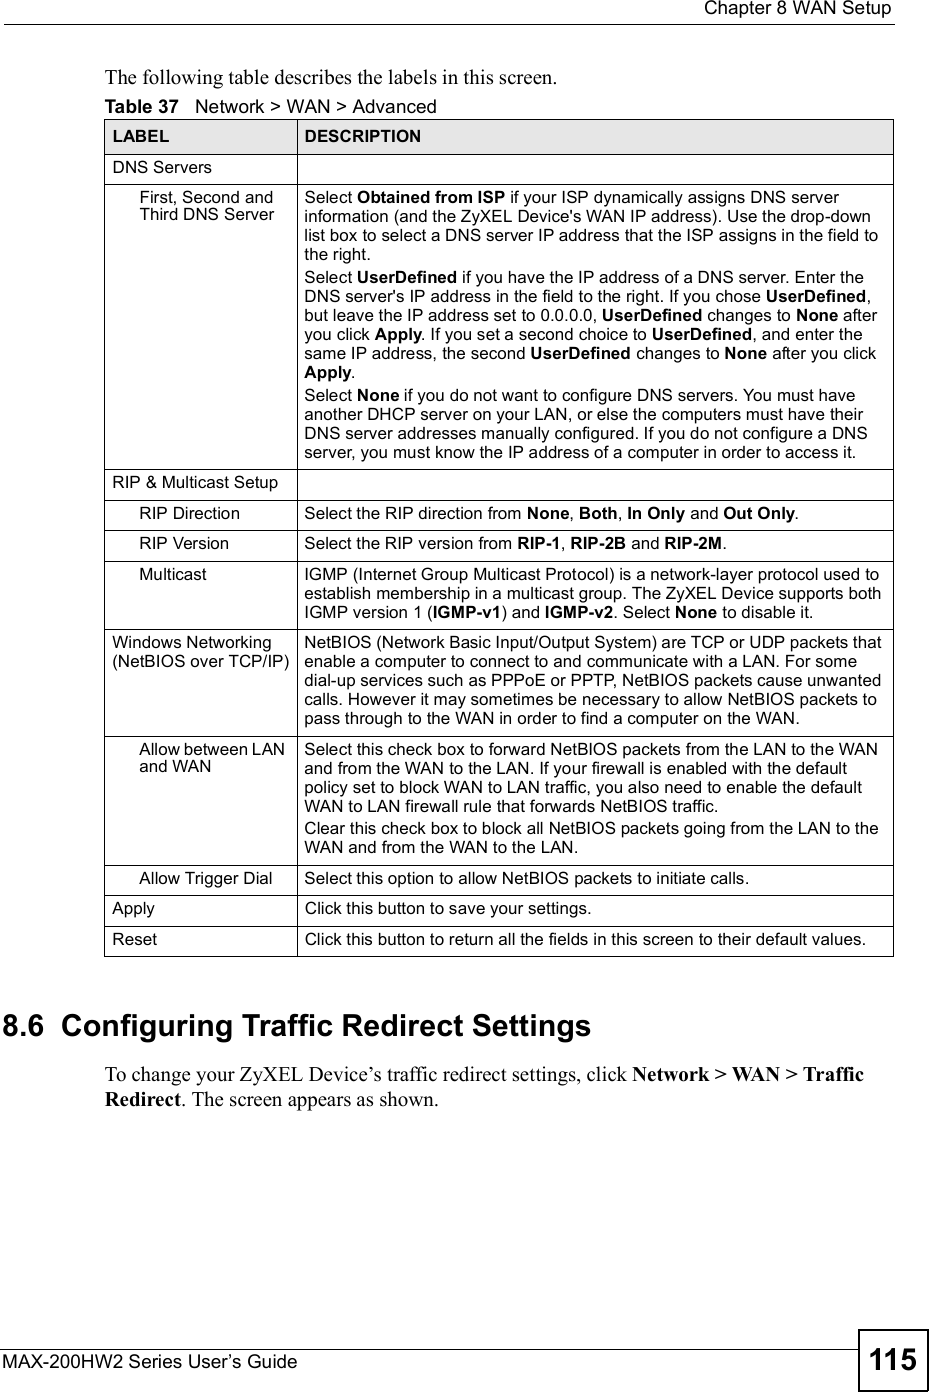  Chapter 8WAN SetupMAX-200HW2 Series User s Guide 115The following table describes the labels in this screen.8.6  Configuring Traffic Redirect SettingsTo change your ZyXEL Device!s traffic redirect settings, click Network &gt; WAN &gt; Traffic Redirect. The screen appears as shown.Table 37   Network &gt; WAN &gt; AdvancedLABEL DESCRIPTIONDNS ServersFirst, Second and Third DNS ServerSelect Obtainedfrom ISP if your ISP dynamically assigns DNS server information (and the ZyXEL Device&apos;s WAN IP address). Use the drop-down list box to select a DNS server IP address that the ISP assigns in the field to the right. Select UserDefined if you have the IP address of a DNS server. Enter the DNS server&apos;s IP address in the field to the right. If you chose UserDefined,but leave the IP address set to 0.0.0.0, UserDefined changes to None after you click Apply. If you set a second choice to UserDefined, and enter the same IP address, the second UserDefined changes to None after you click Apply.Select None if you do not want to configure DNS servers. You must have another DHCP server on your LAN, or else the computers must have their DNS server addresses manually configured. If you do not configure a DNS server, you must know the IP address of a computer in order to access it.RIP &amp; Multicast SetupRIP DirectionSelect the RIP direction from None,Both,In Only and Out Only.RIP VersionSelect the RIP version from RIP-1,RIP-2B and RIP-2M.MulticastIGMP (Internet Group Multicast Protocol) is a network-layer protocol used to establish membership in a multicast group. The ZyXEL Device supports both IGMP version 1 (IGMP-v1) and IGMP-v2. Select None to disable it.Windows Networking (NetBIOS over TCP/IP)NetBIOS (Network Basic Input/Output System) are TCP or UDP packets that enable a computer to connect to and communicate with a LAN. For some dial-up services such as PPPoE or PPTP, NetBIOS packets cause unwanted calls. However it may sometimes be necessary to allow NetBIOS packets to pass through to the WAN in order to find a computer on the WAN.Allow between LAN and WANSelect this check box to forward NetBIOS packets from the LAN to the WAN and from the WAN to the LAN. If your firewall is enabled with the default policy set to block WAN to LAN traffic, you also need to enable the default WAN to LAN firewall rule that forwards NetBIOS traffic.Clear this check box to block all NetBIOS packets going from the LAN to the WAN and from the WAN to the LAN.Allow Trigger DialSelect this option to allow NetBIOS packets to initiate calls.ApplyClick this button to save your settings.ResetClick this button to return all the fields in this screen to their default values.